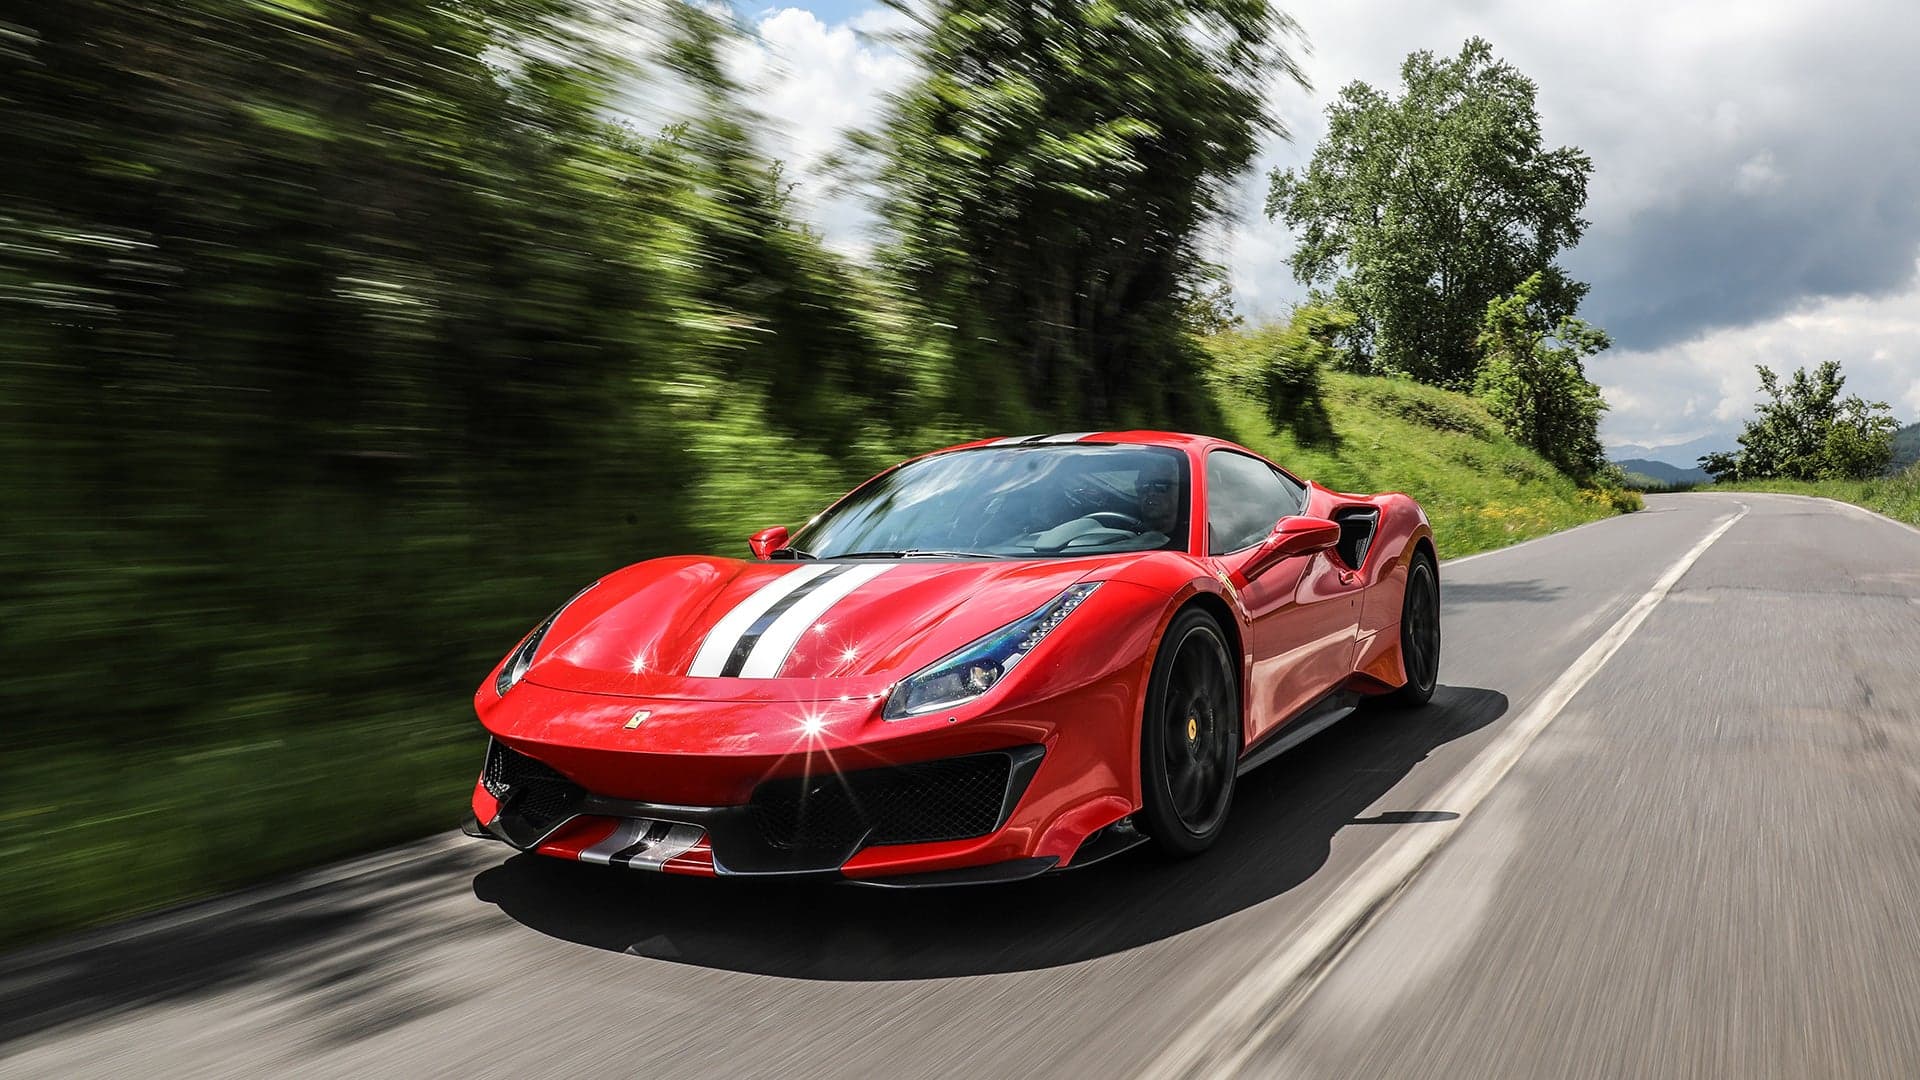 2019 Ferrari 488 Pista First Drive in Italy: Maranello’s Newest Is As Much Superhero as Supercar